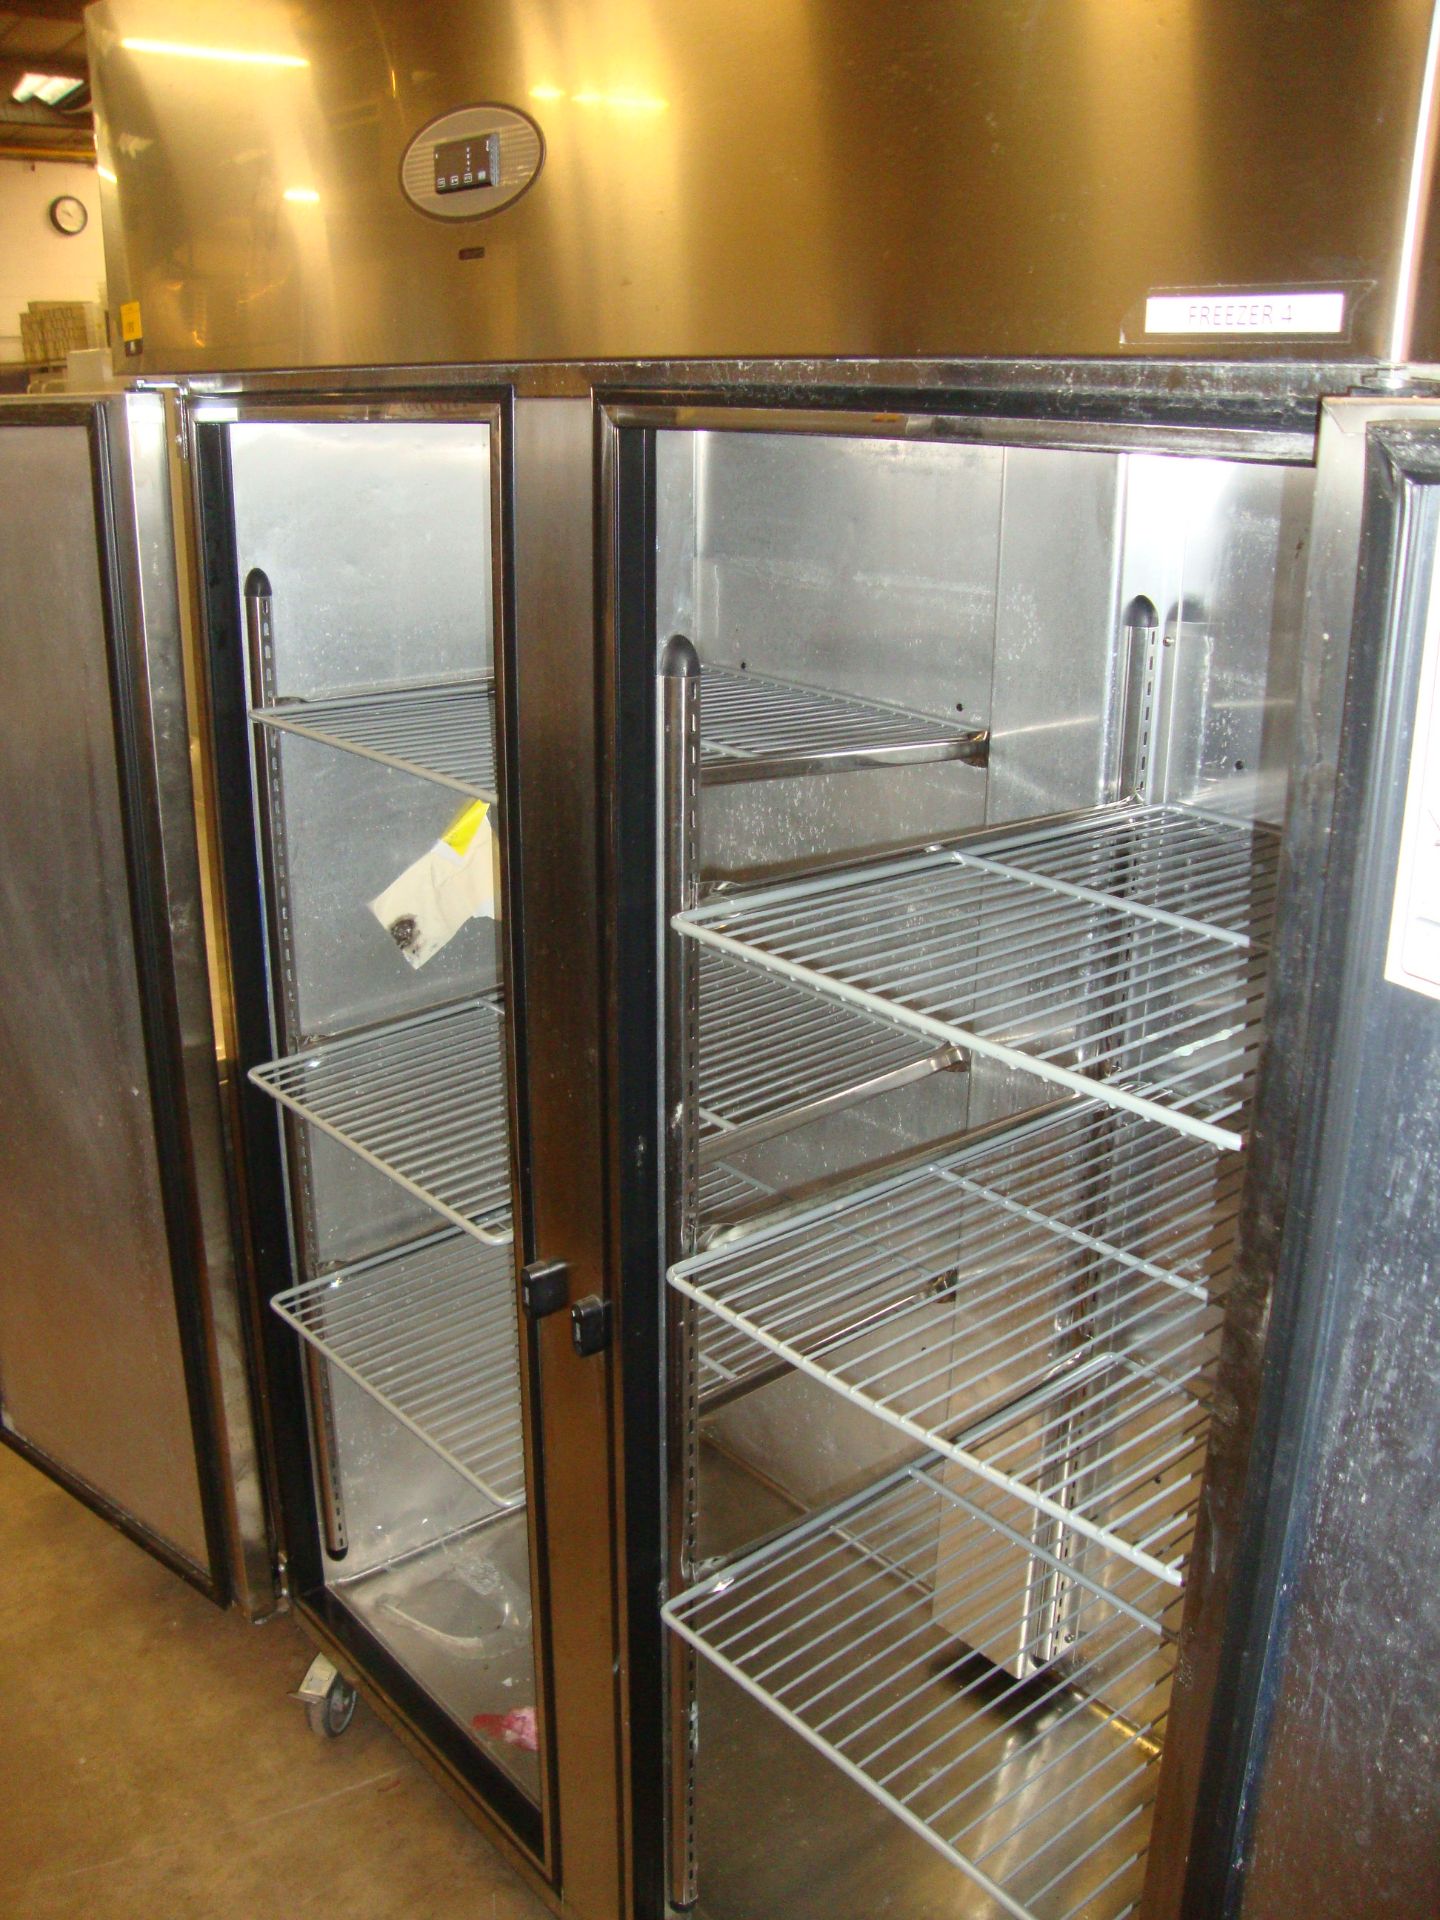 Foster large stainless steel mobile twin door freezer, model PROG1350L-A - Image 4 of 5